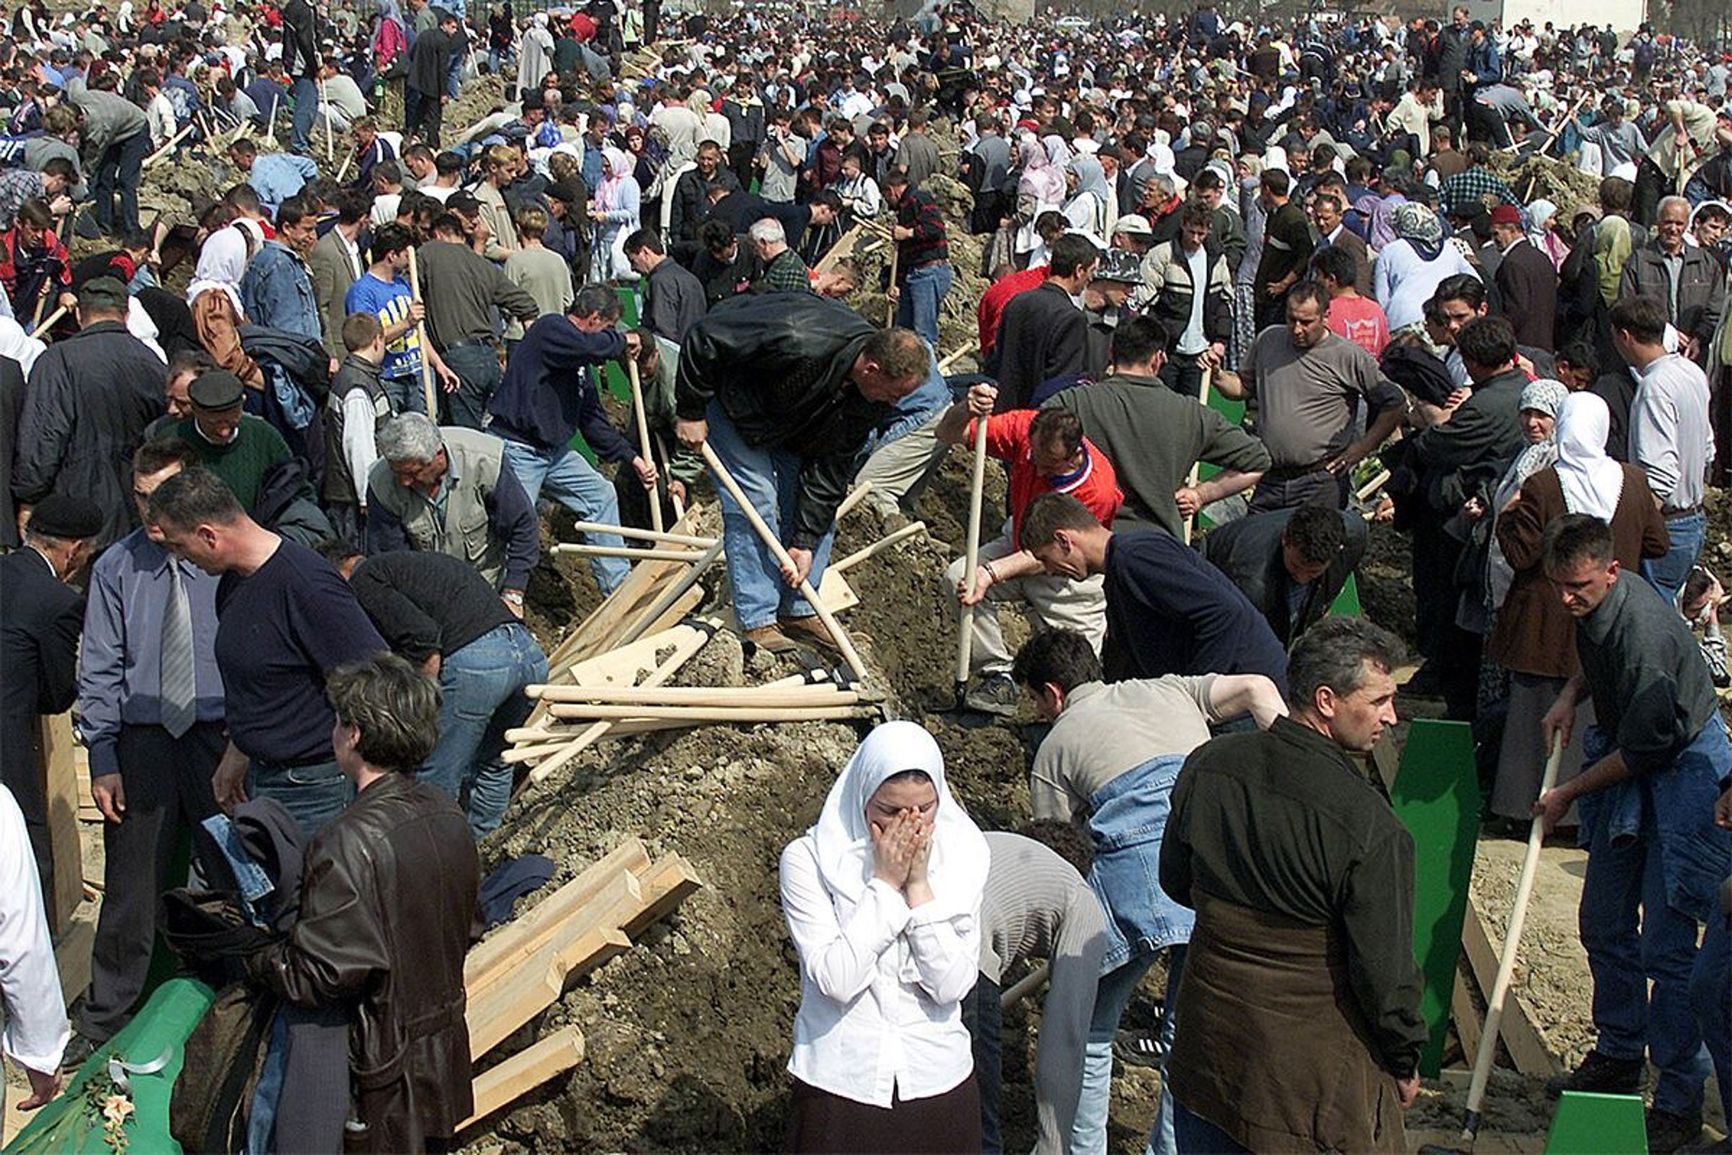 Relatives of those killed during the massacre in Srebrenica in 1995 bury the remains of their loved ones in a city field on March 31, 2003